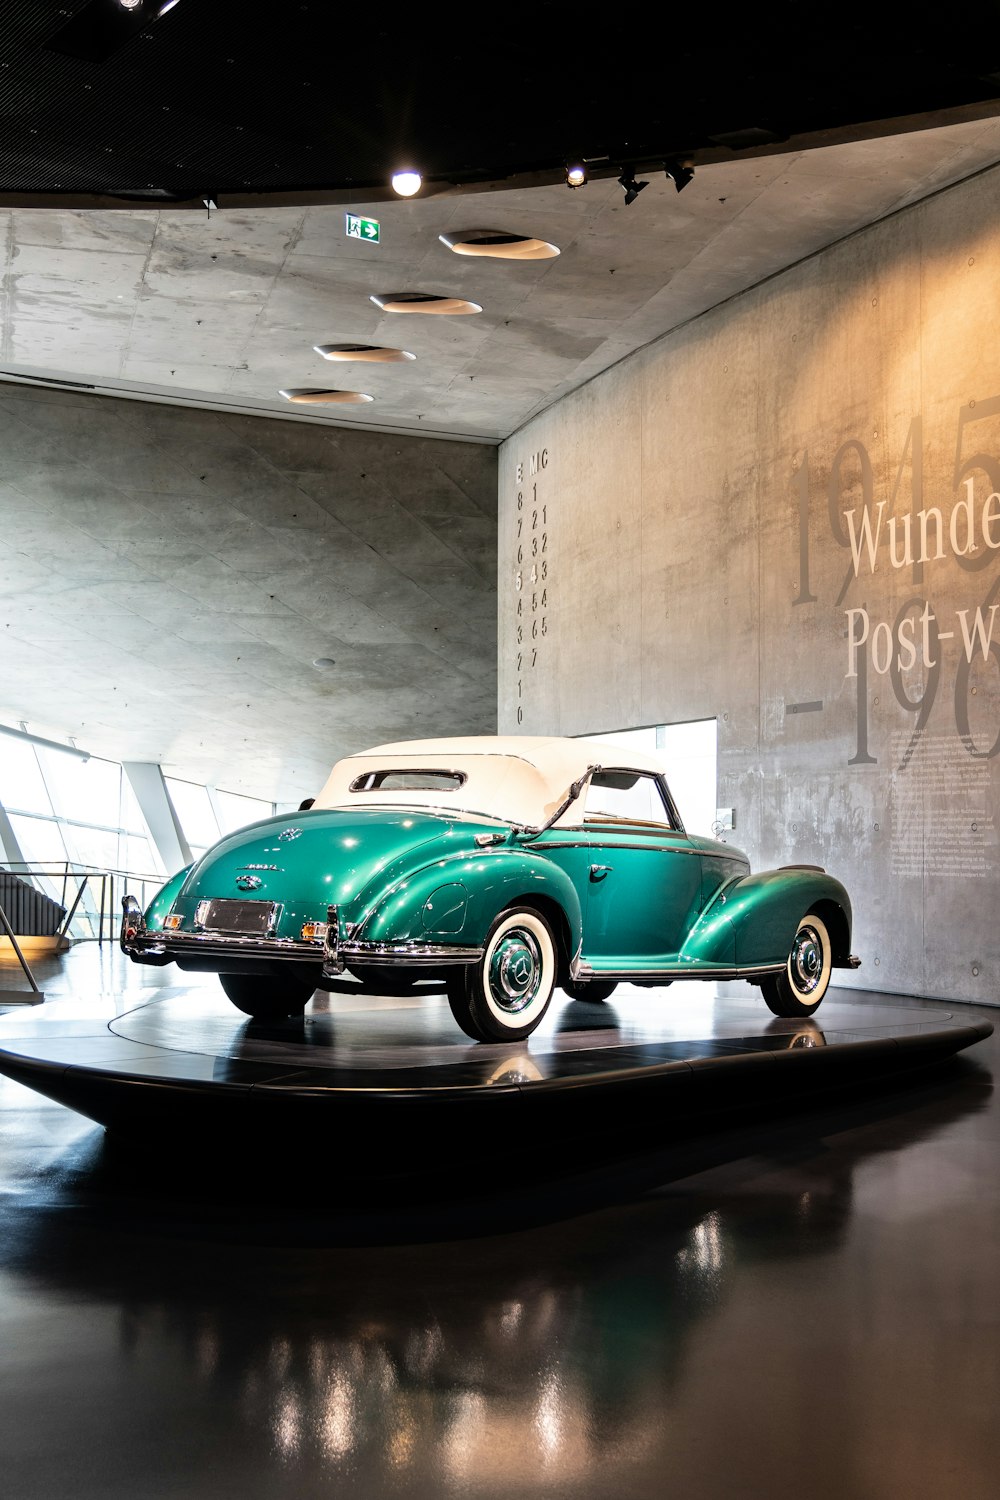 a green and white car on display in a museum